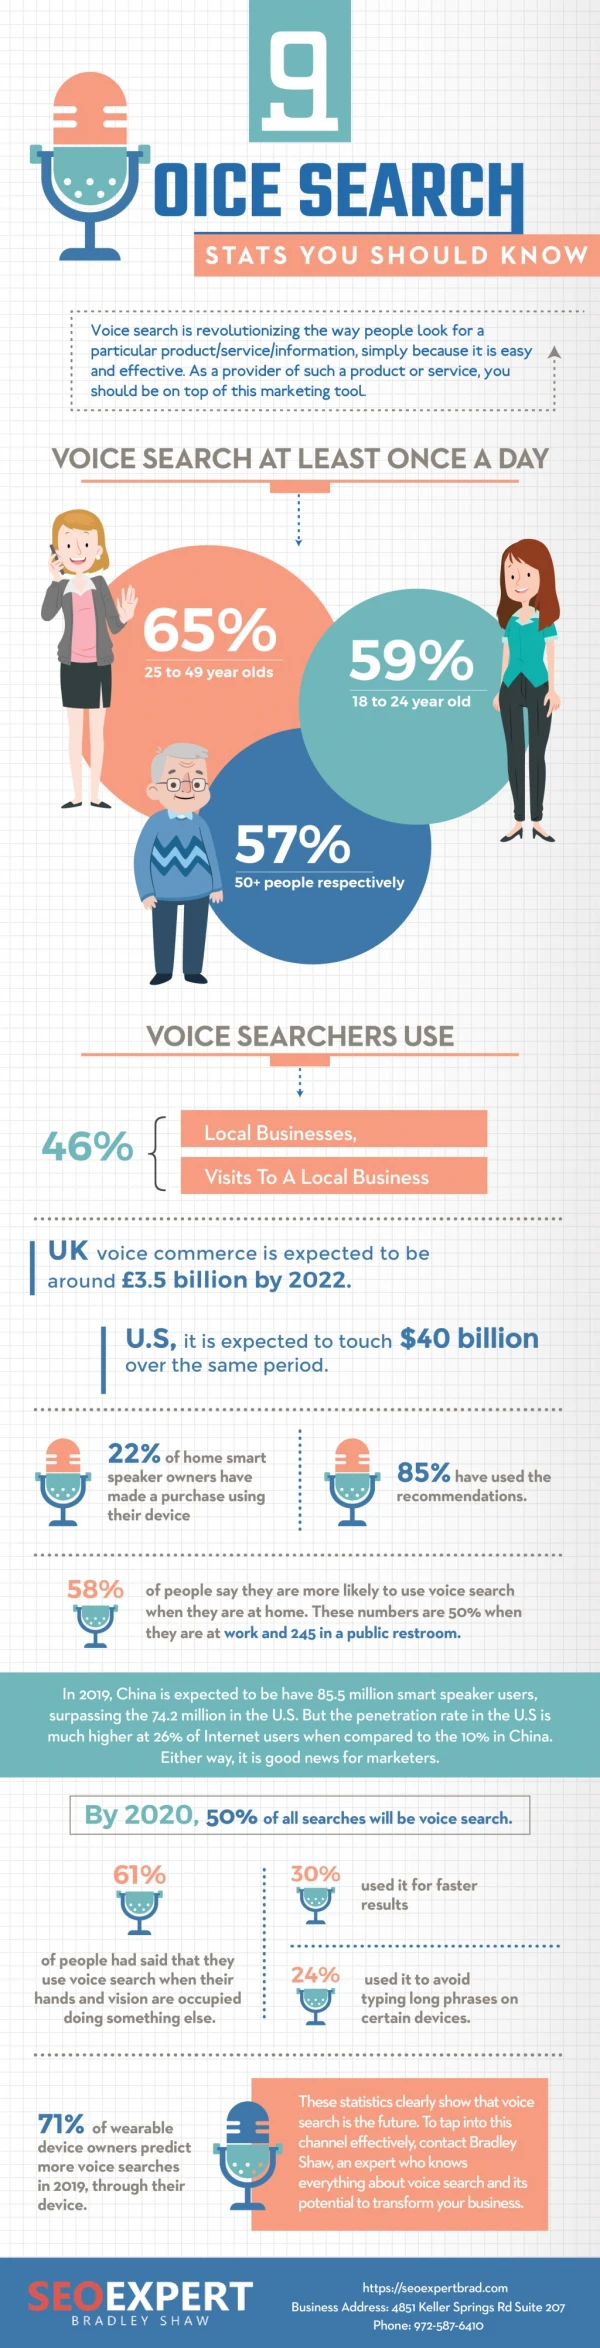 9 Voice Search Stats you Should Know